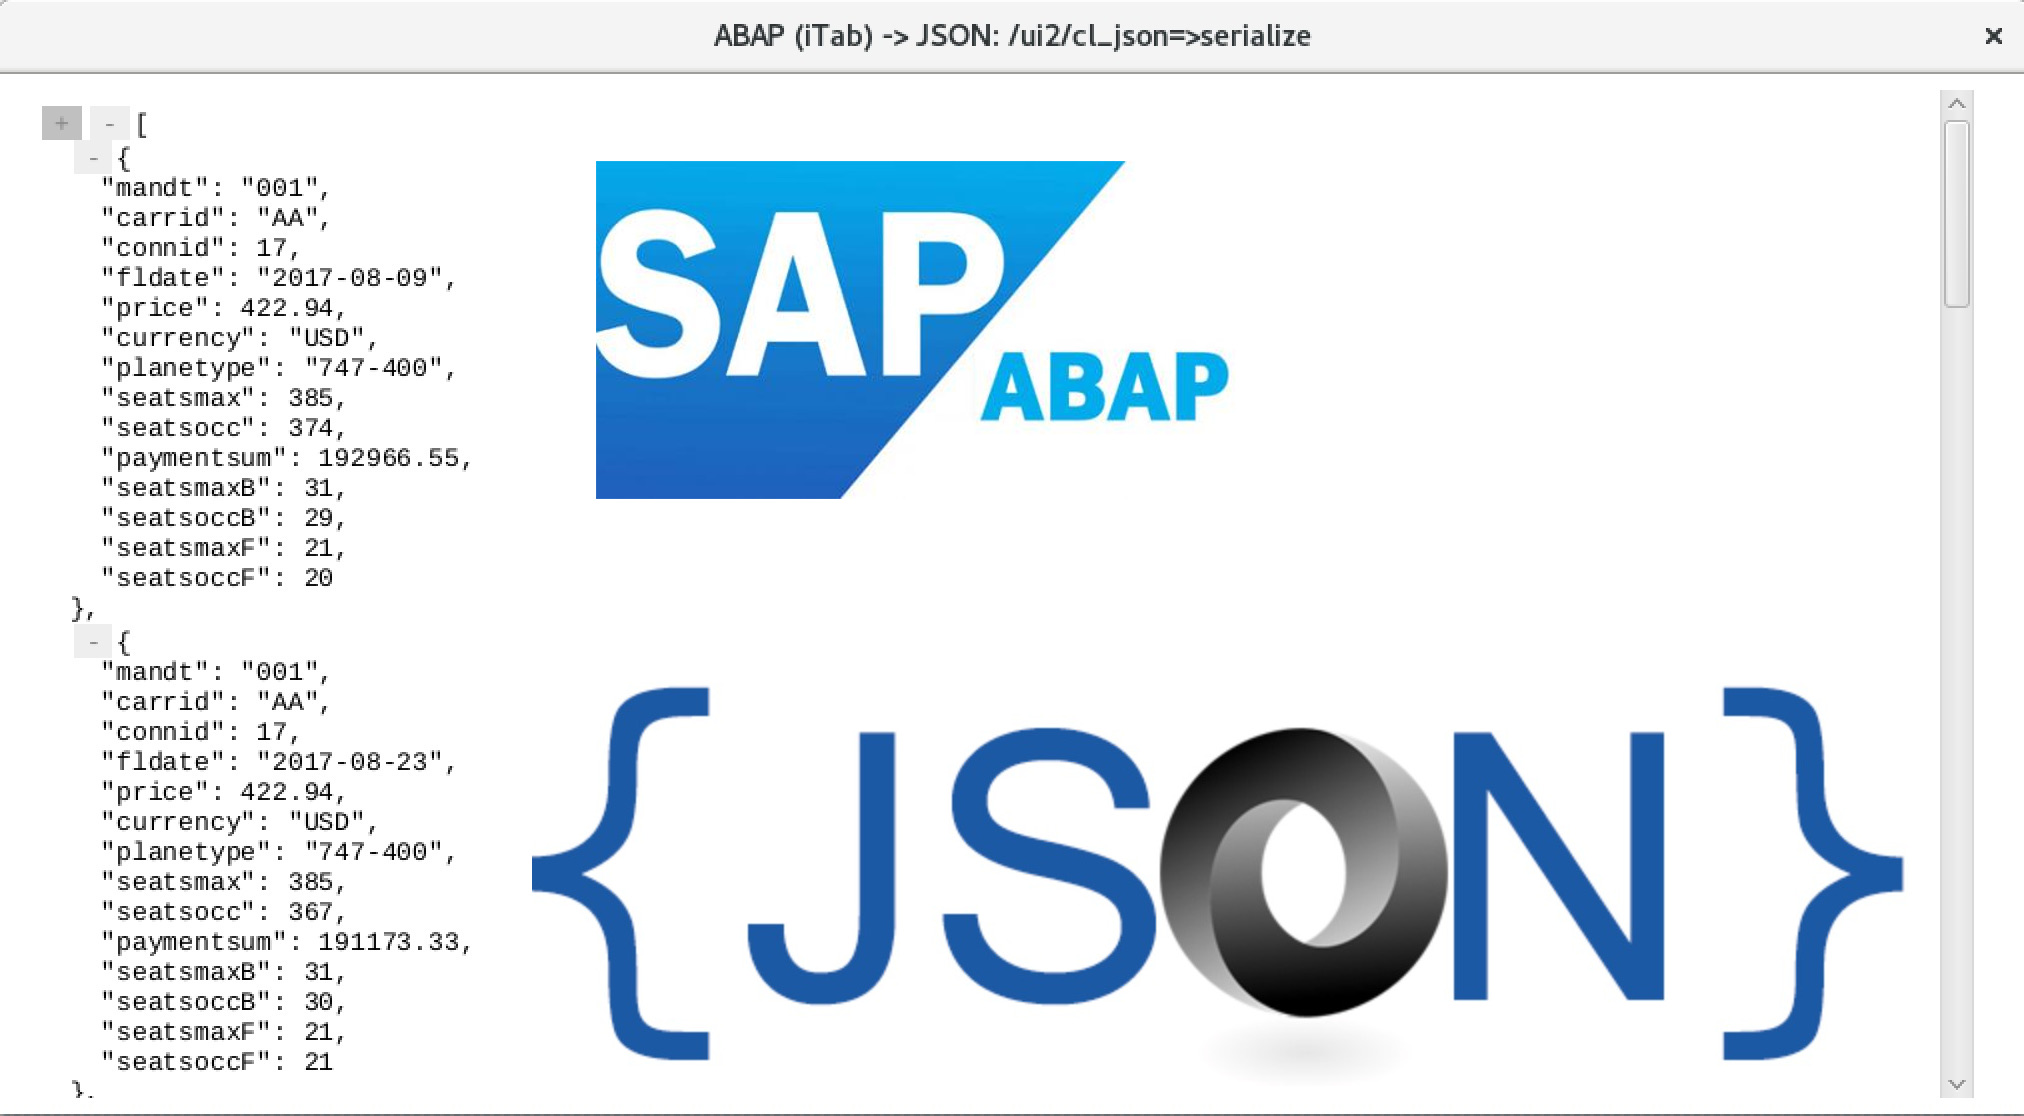 ABAP to JSON and JSON to ABAP